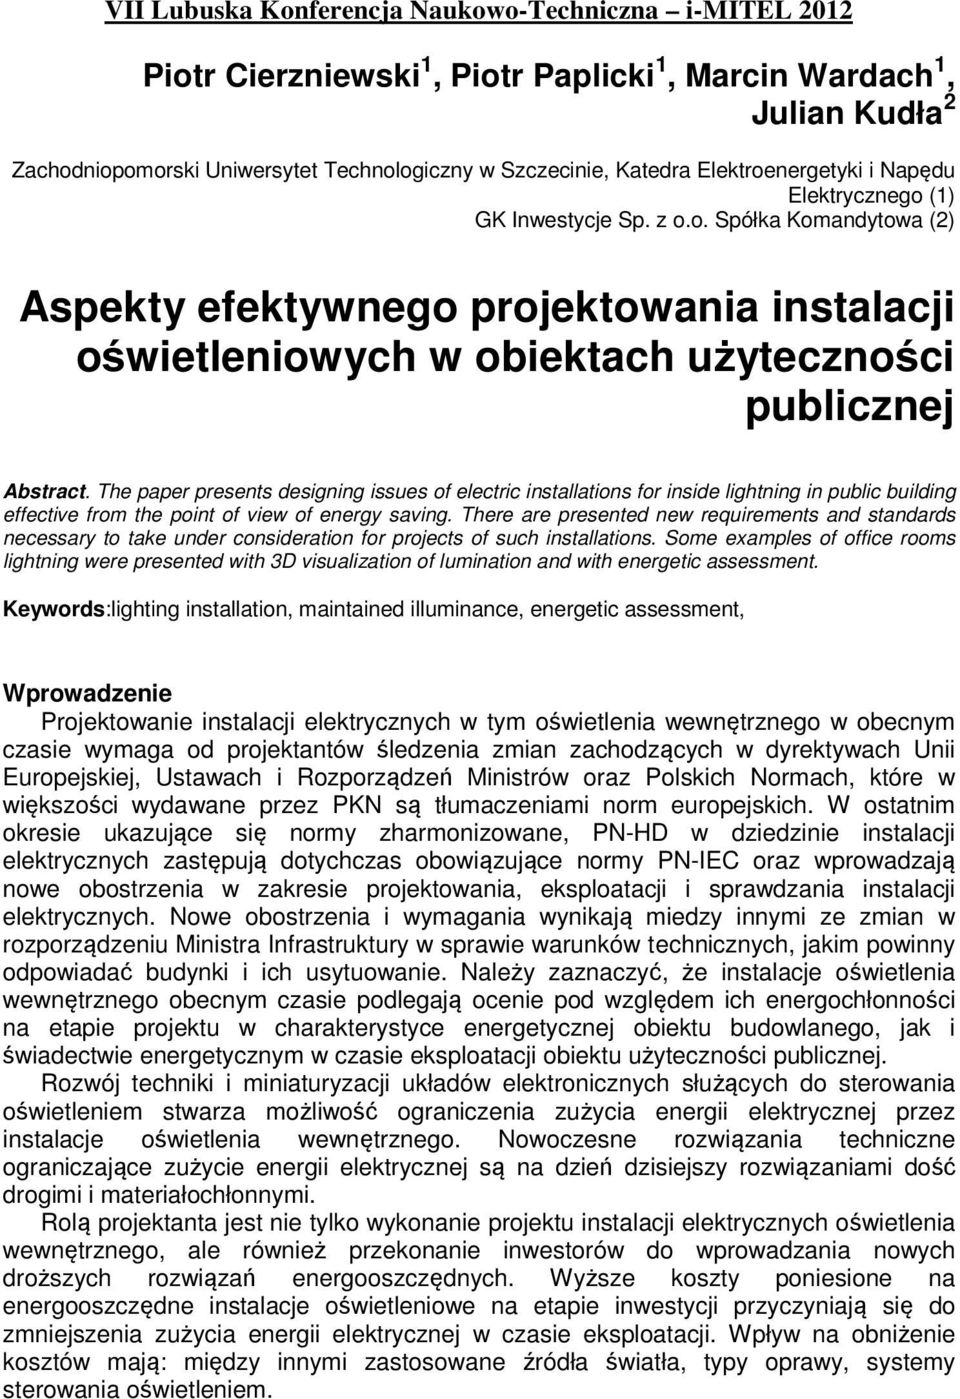 The paper presents designing issues of electric installations for inside lightning in public building effective from the point of view of energy saving.